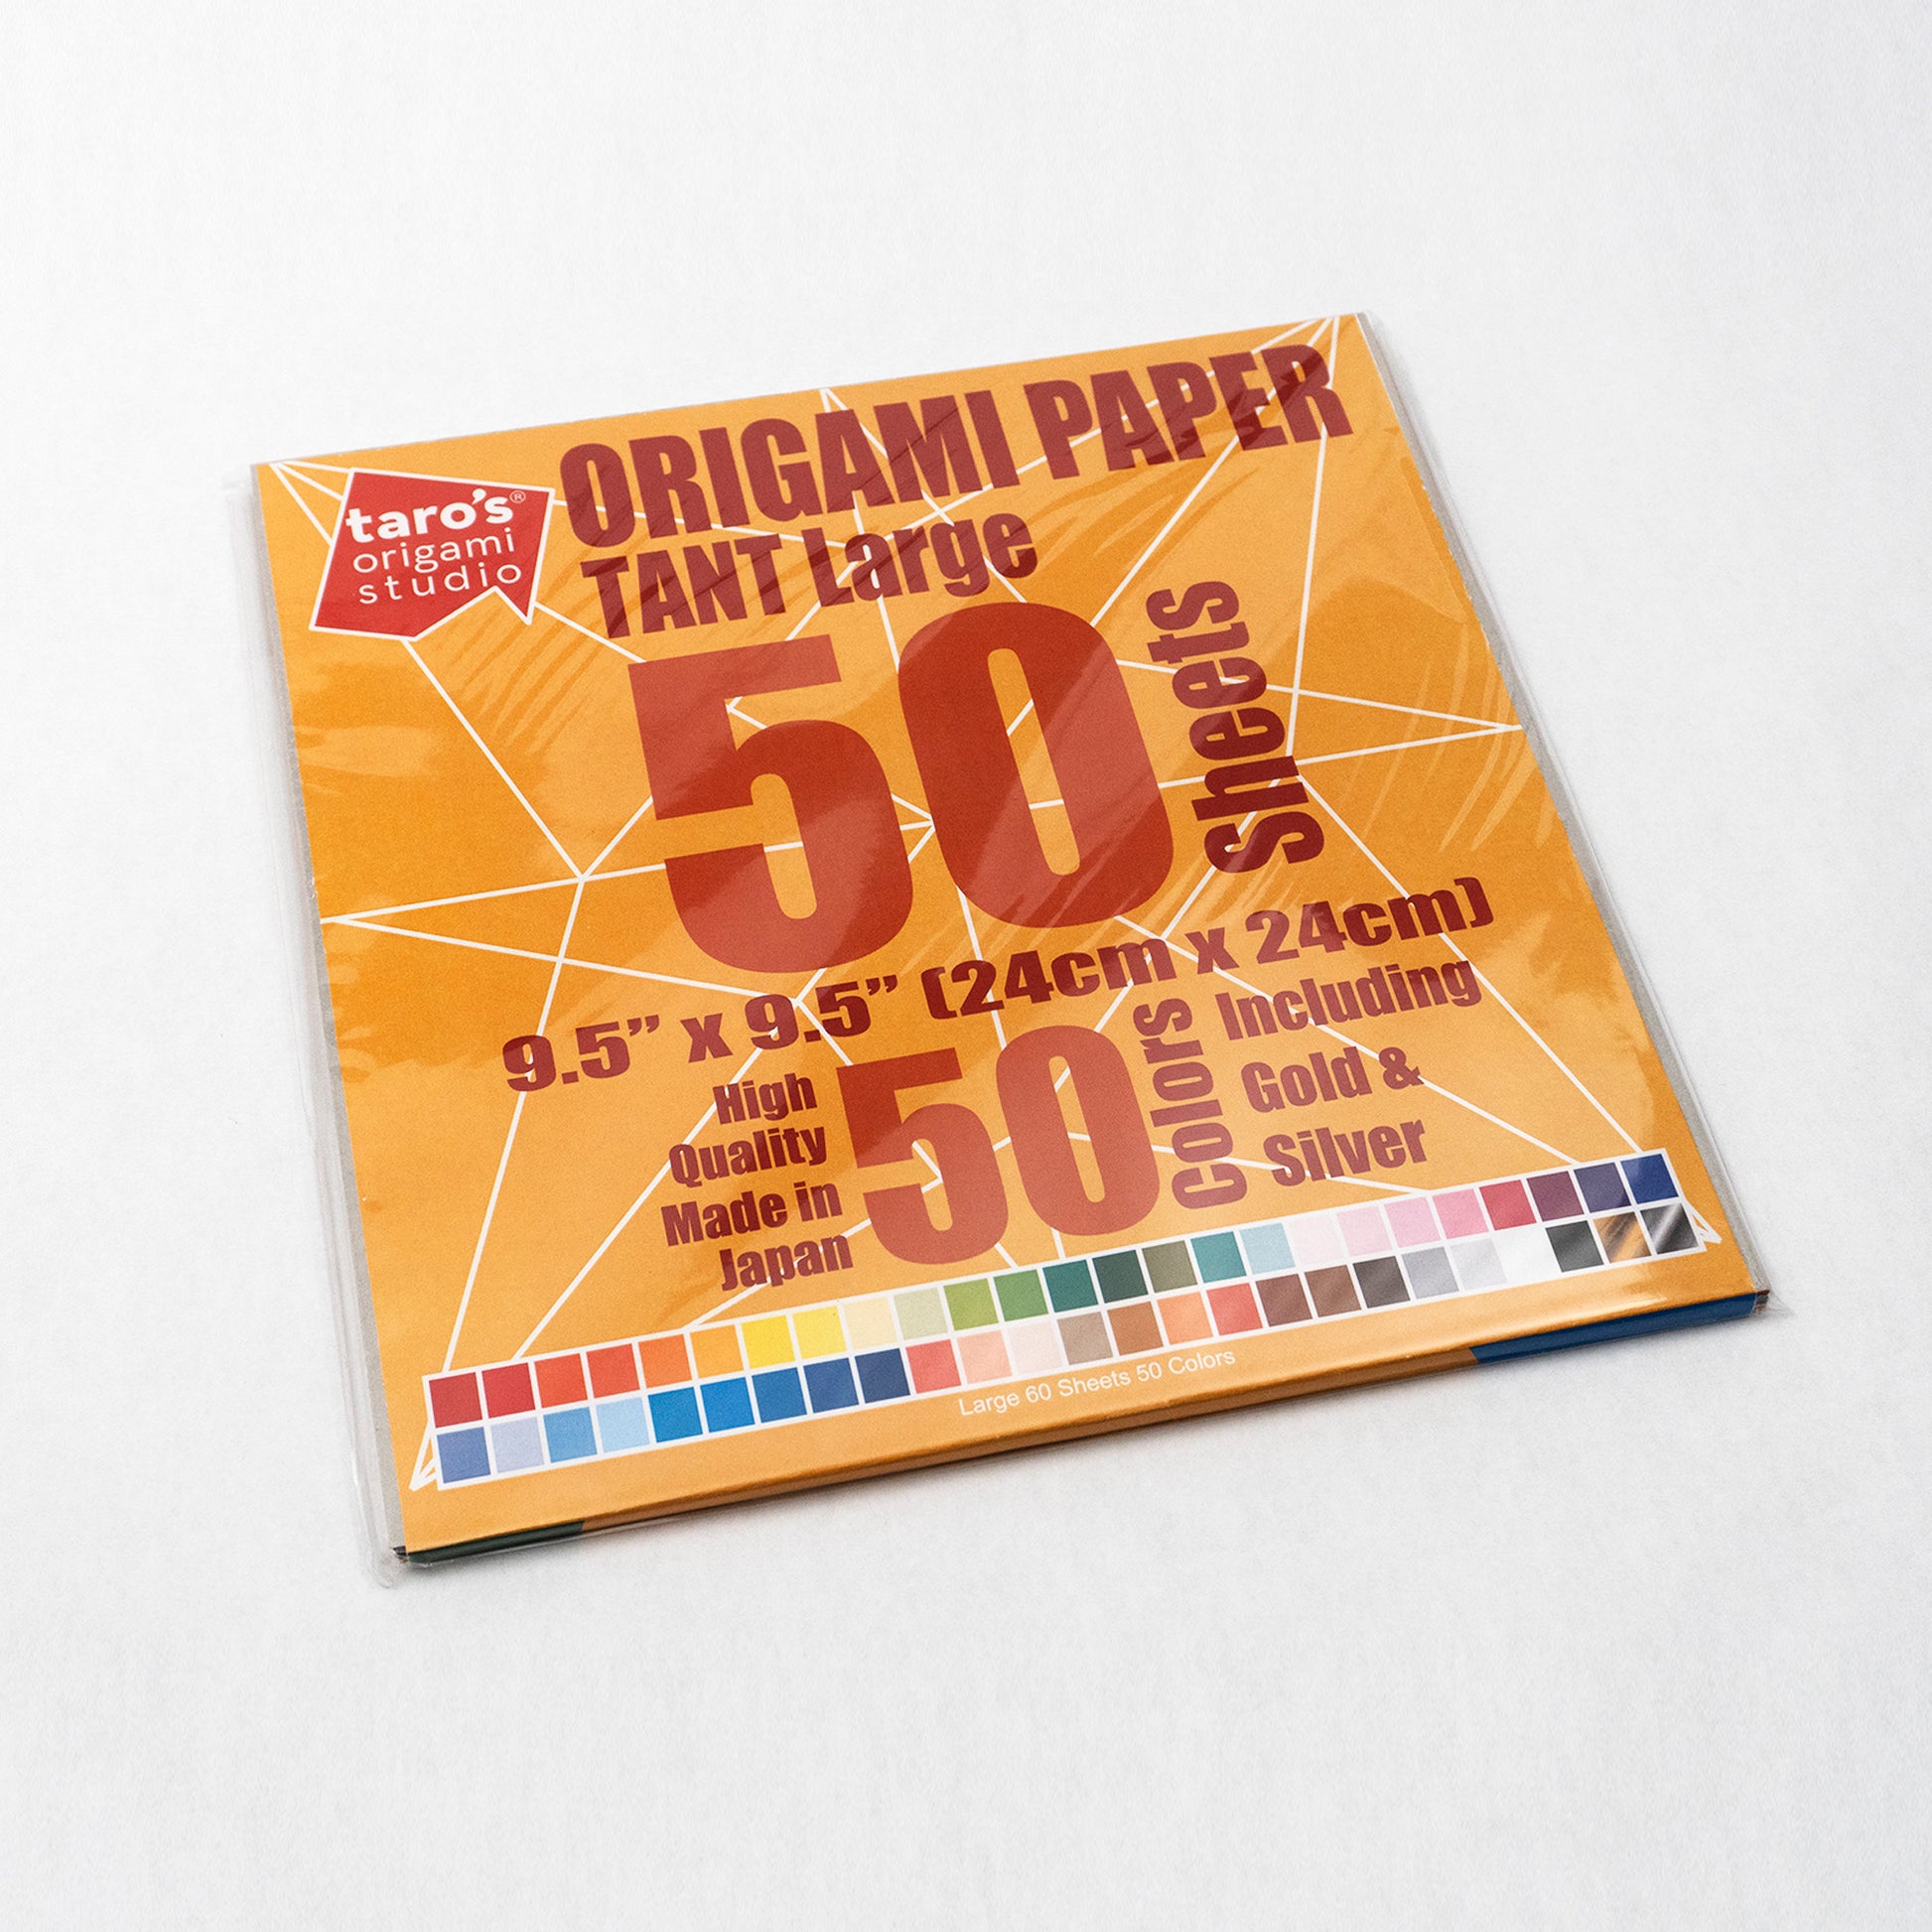 TANT Jumbo size 13.8 inch (35cm) Japanese Origami Paper, 50 Double